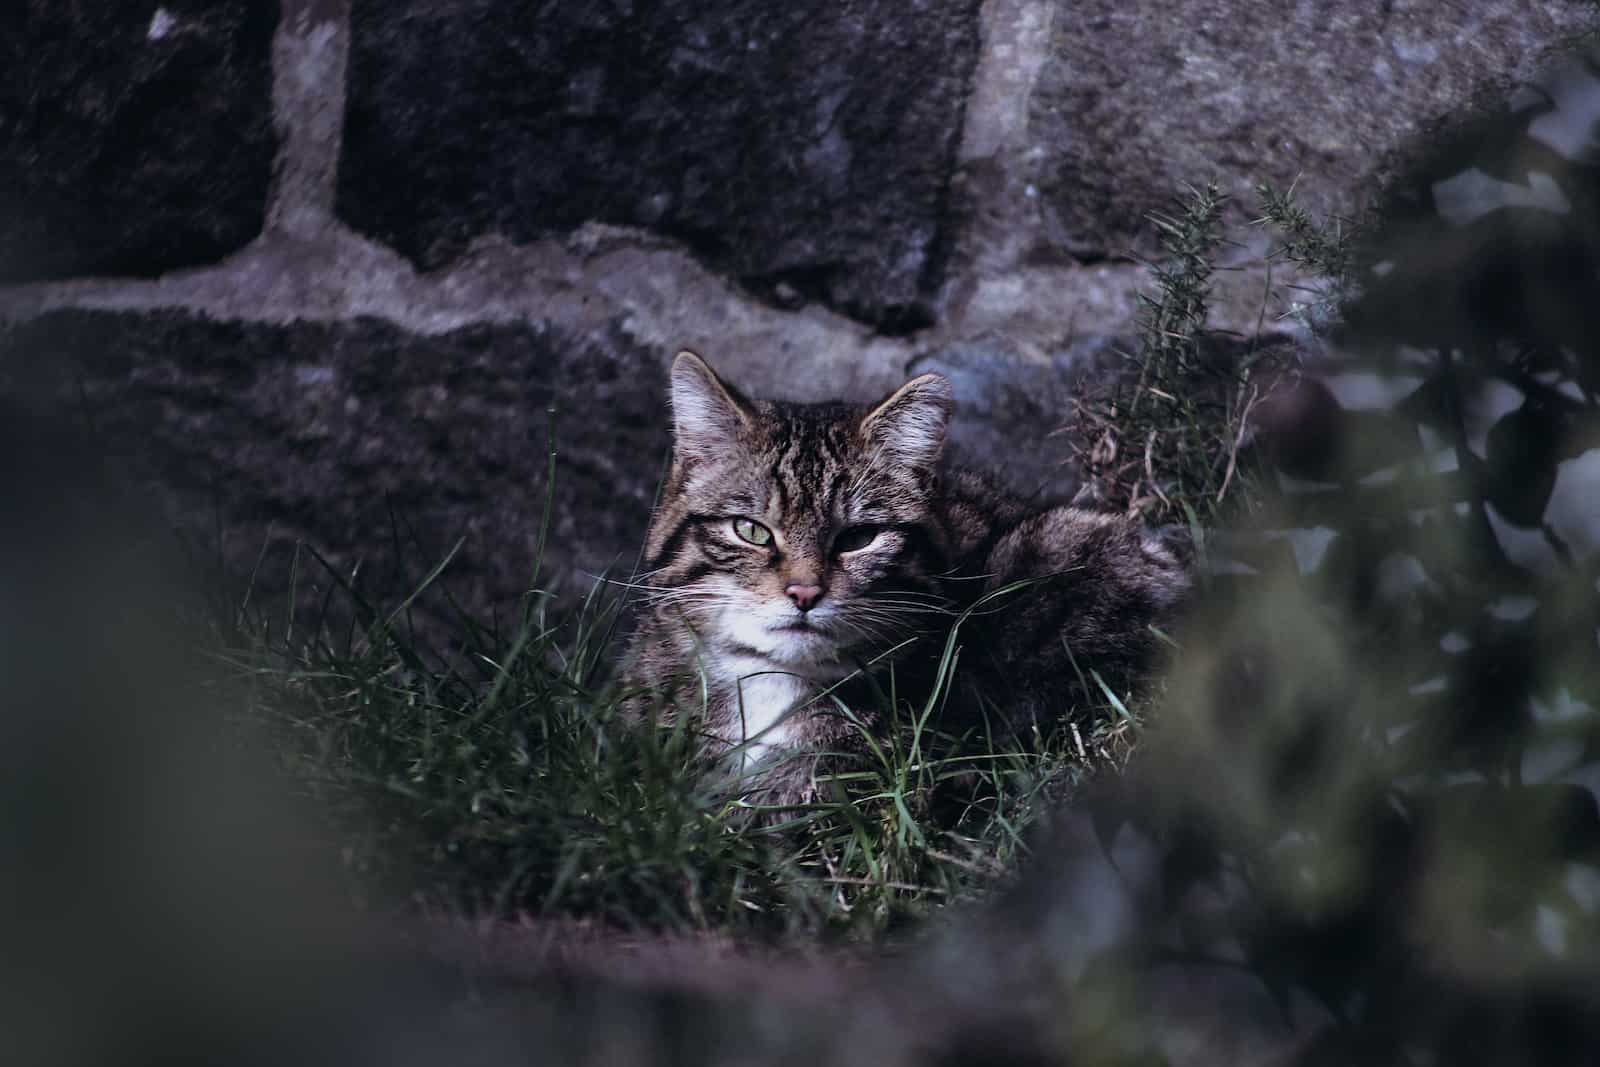 scottish wildcat by the wall